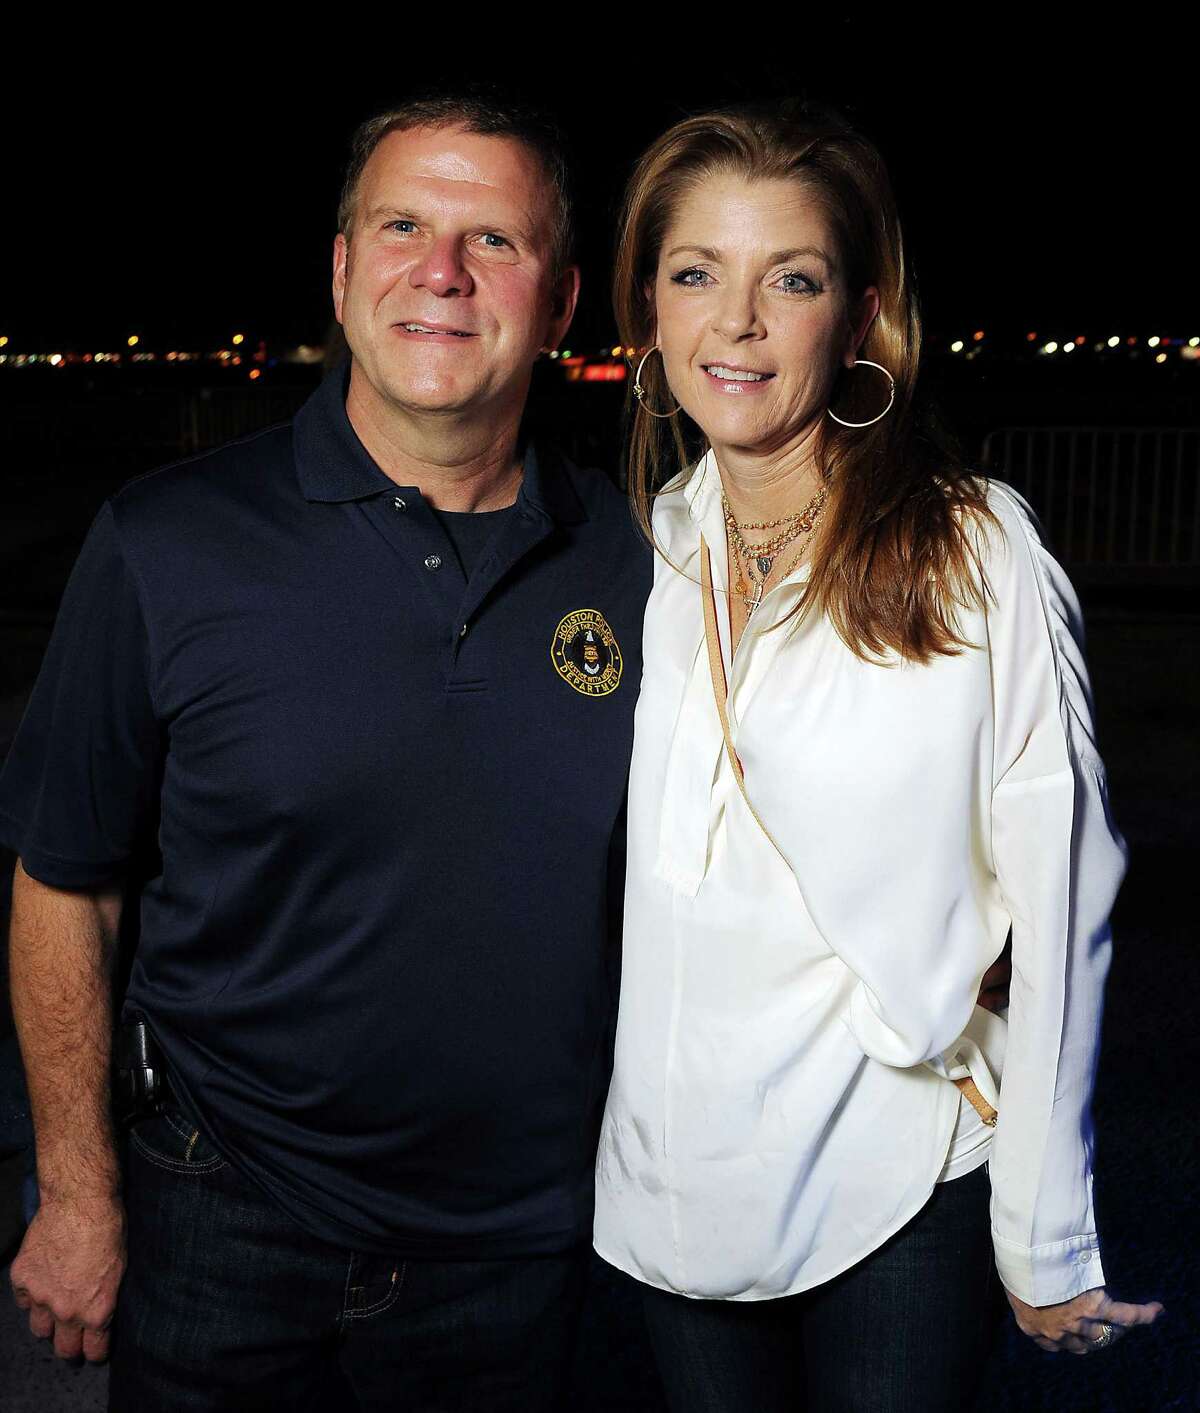 Chairs Paige and Tilman Fertitta at the HPD True Blue Gala benefitting the Houston Police Foundation at the Landry's Flight Hanger at Hobby Airport Saturday Oct. 20,2012.(Dave Rossman photo)